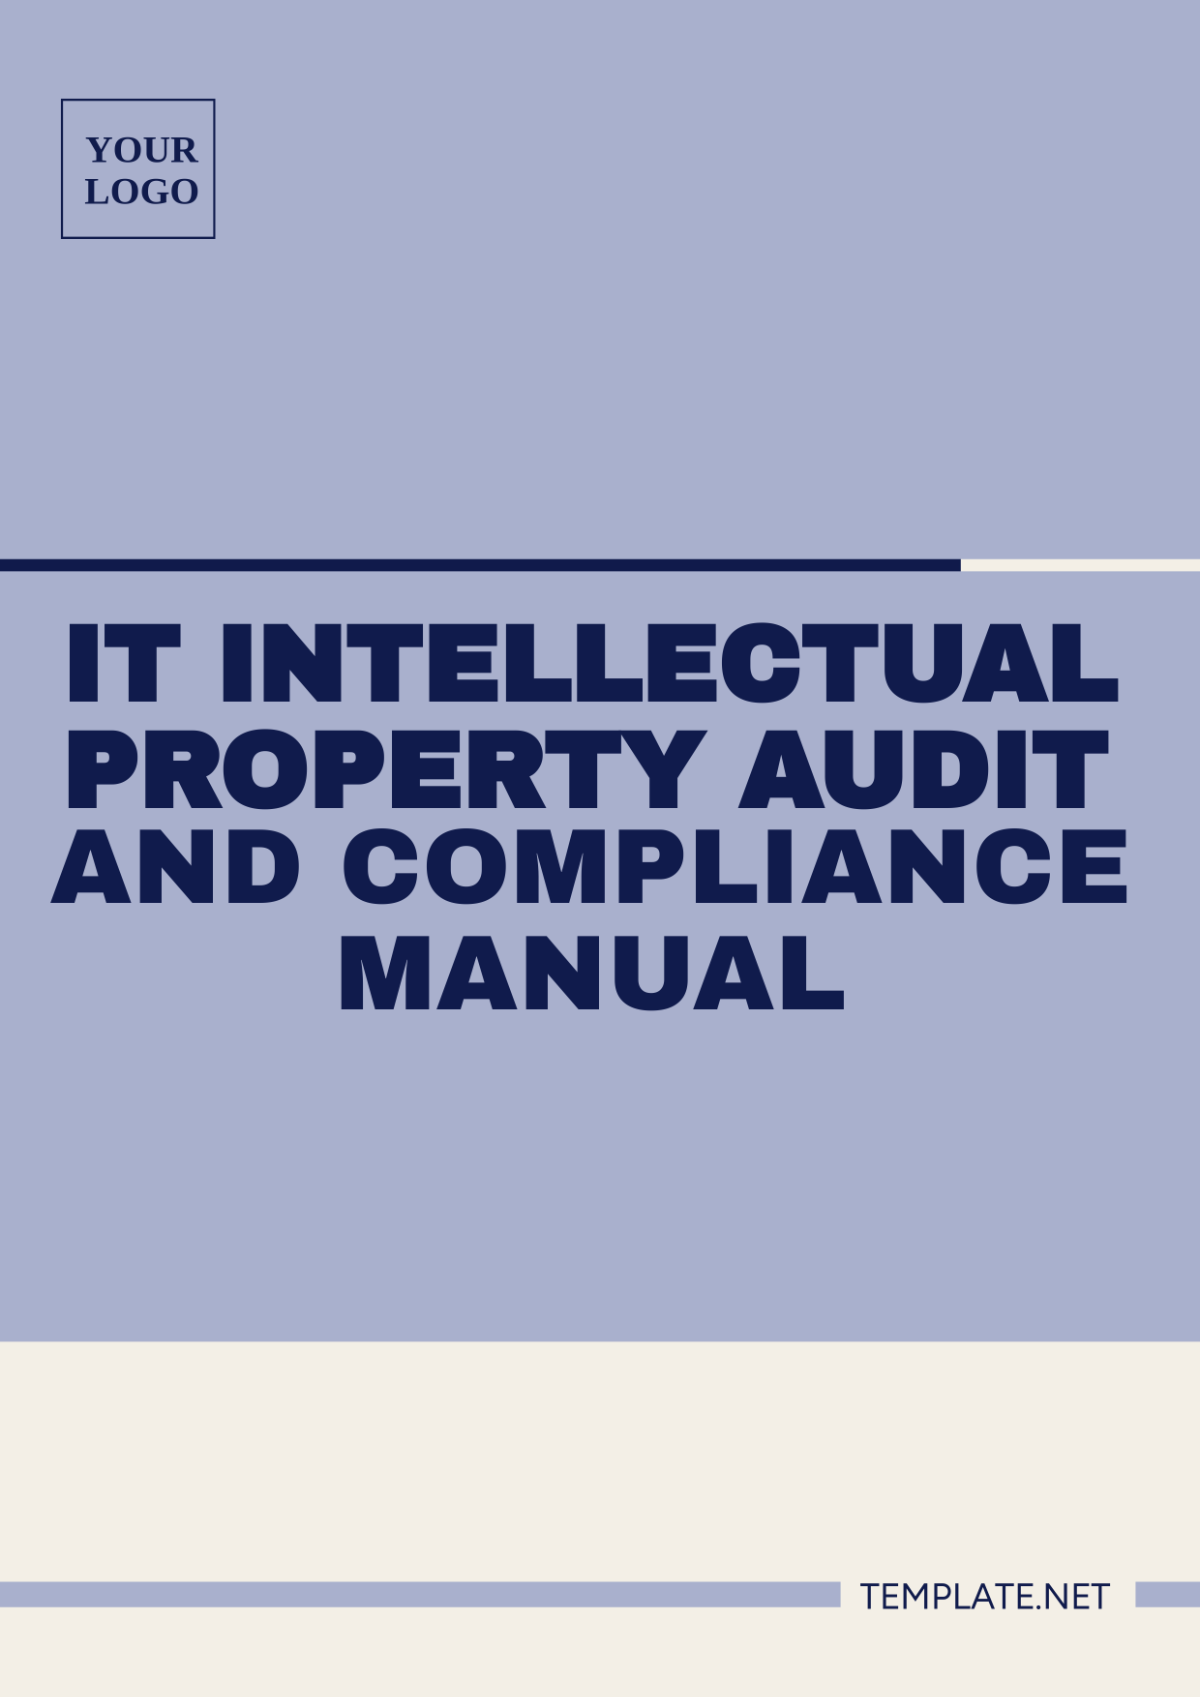 Free IT Intellectual Property Audit And Compliance Manual Template